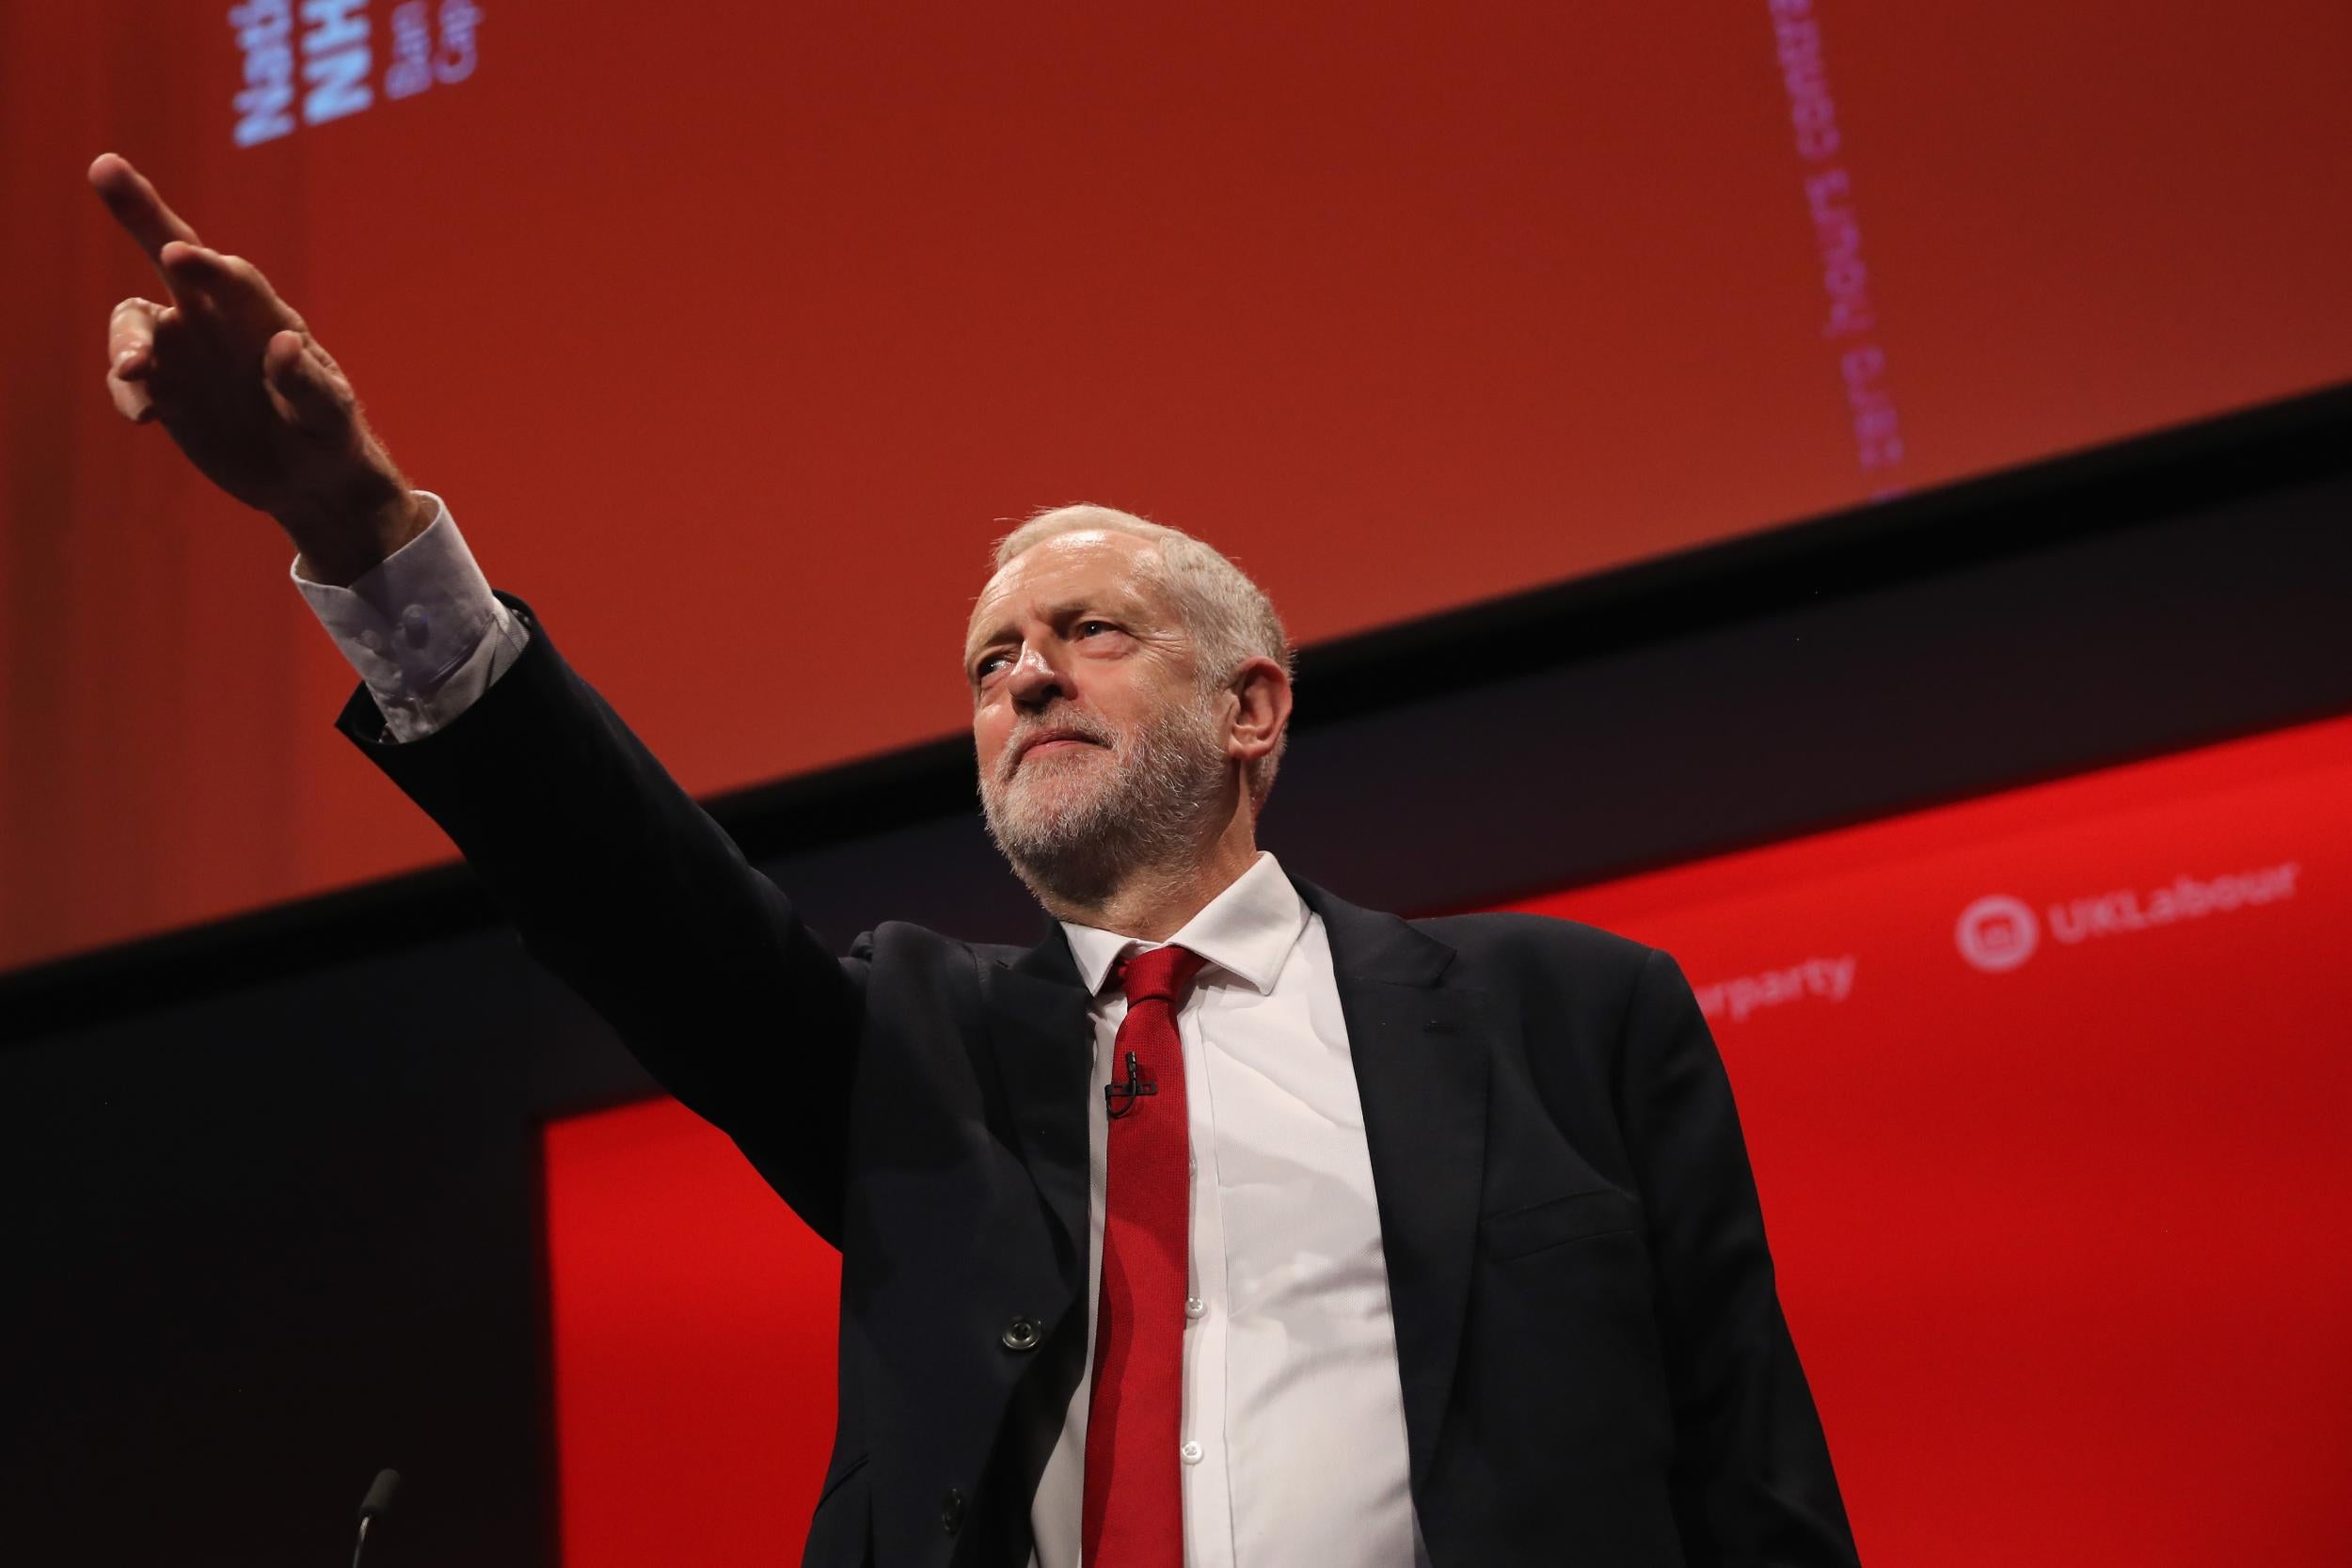 Corbynmania swung the election in a way that I could not have predicted